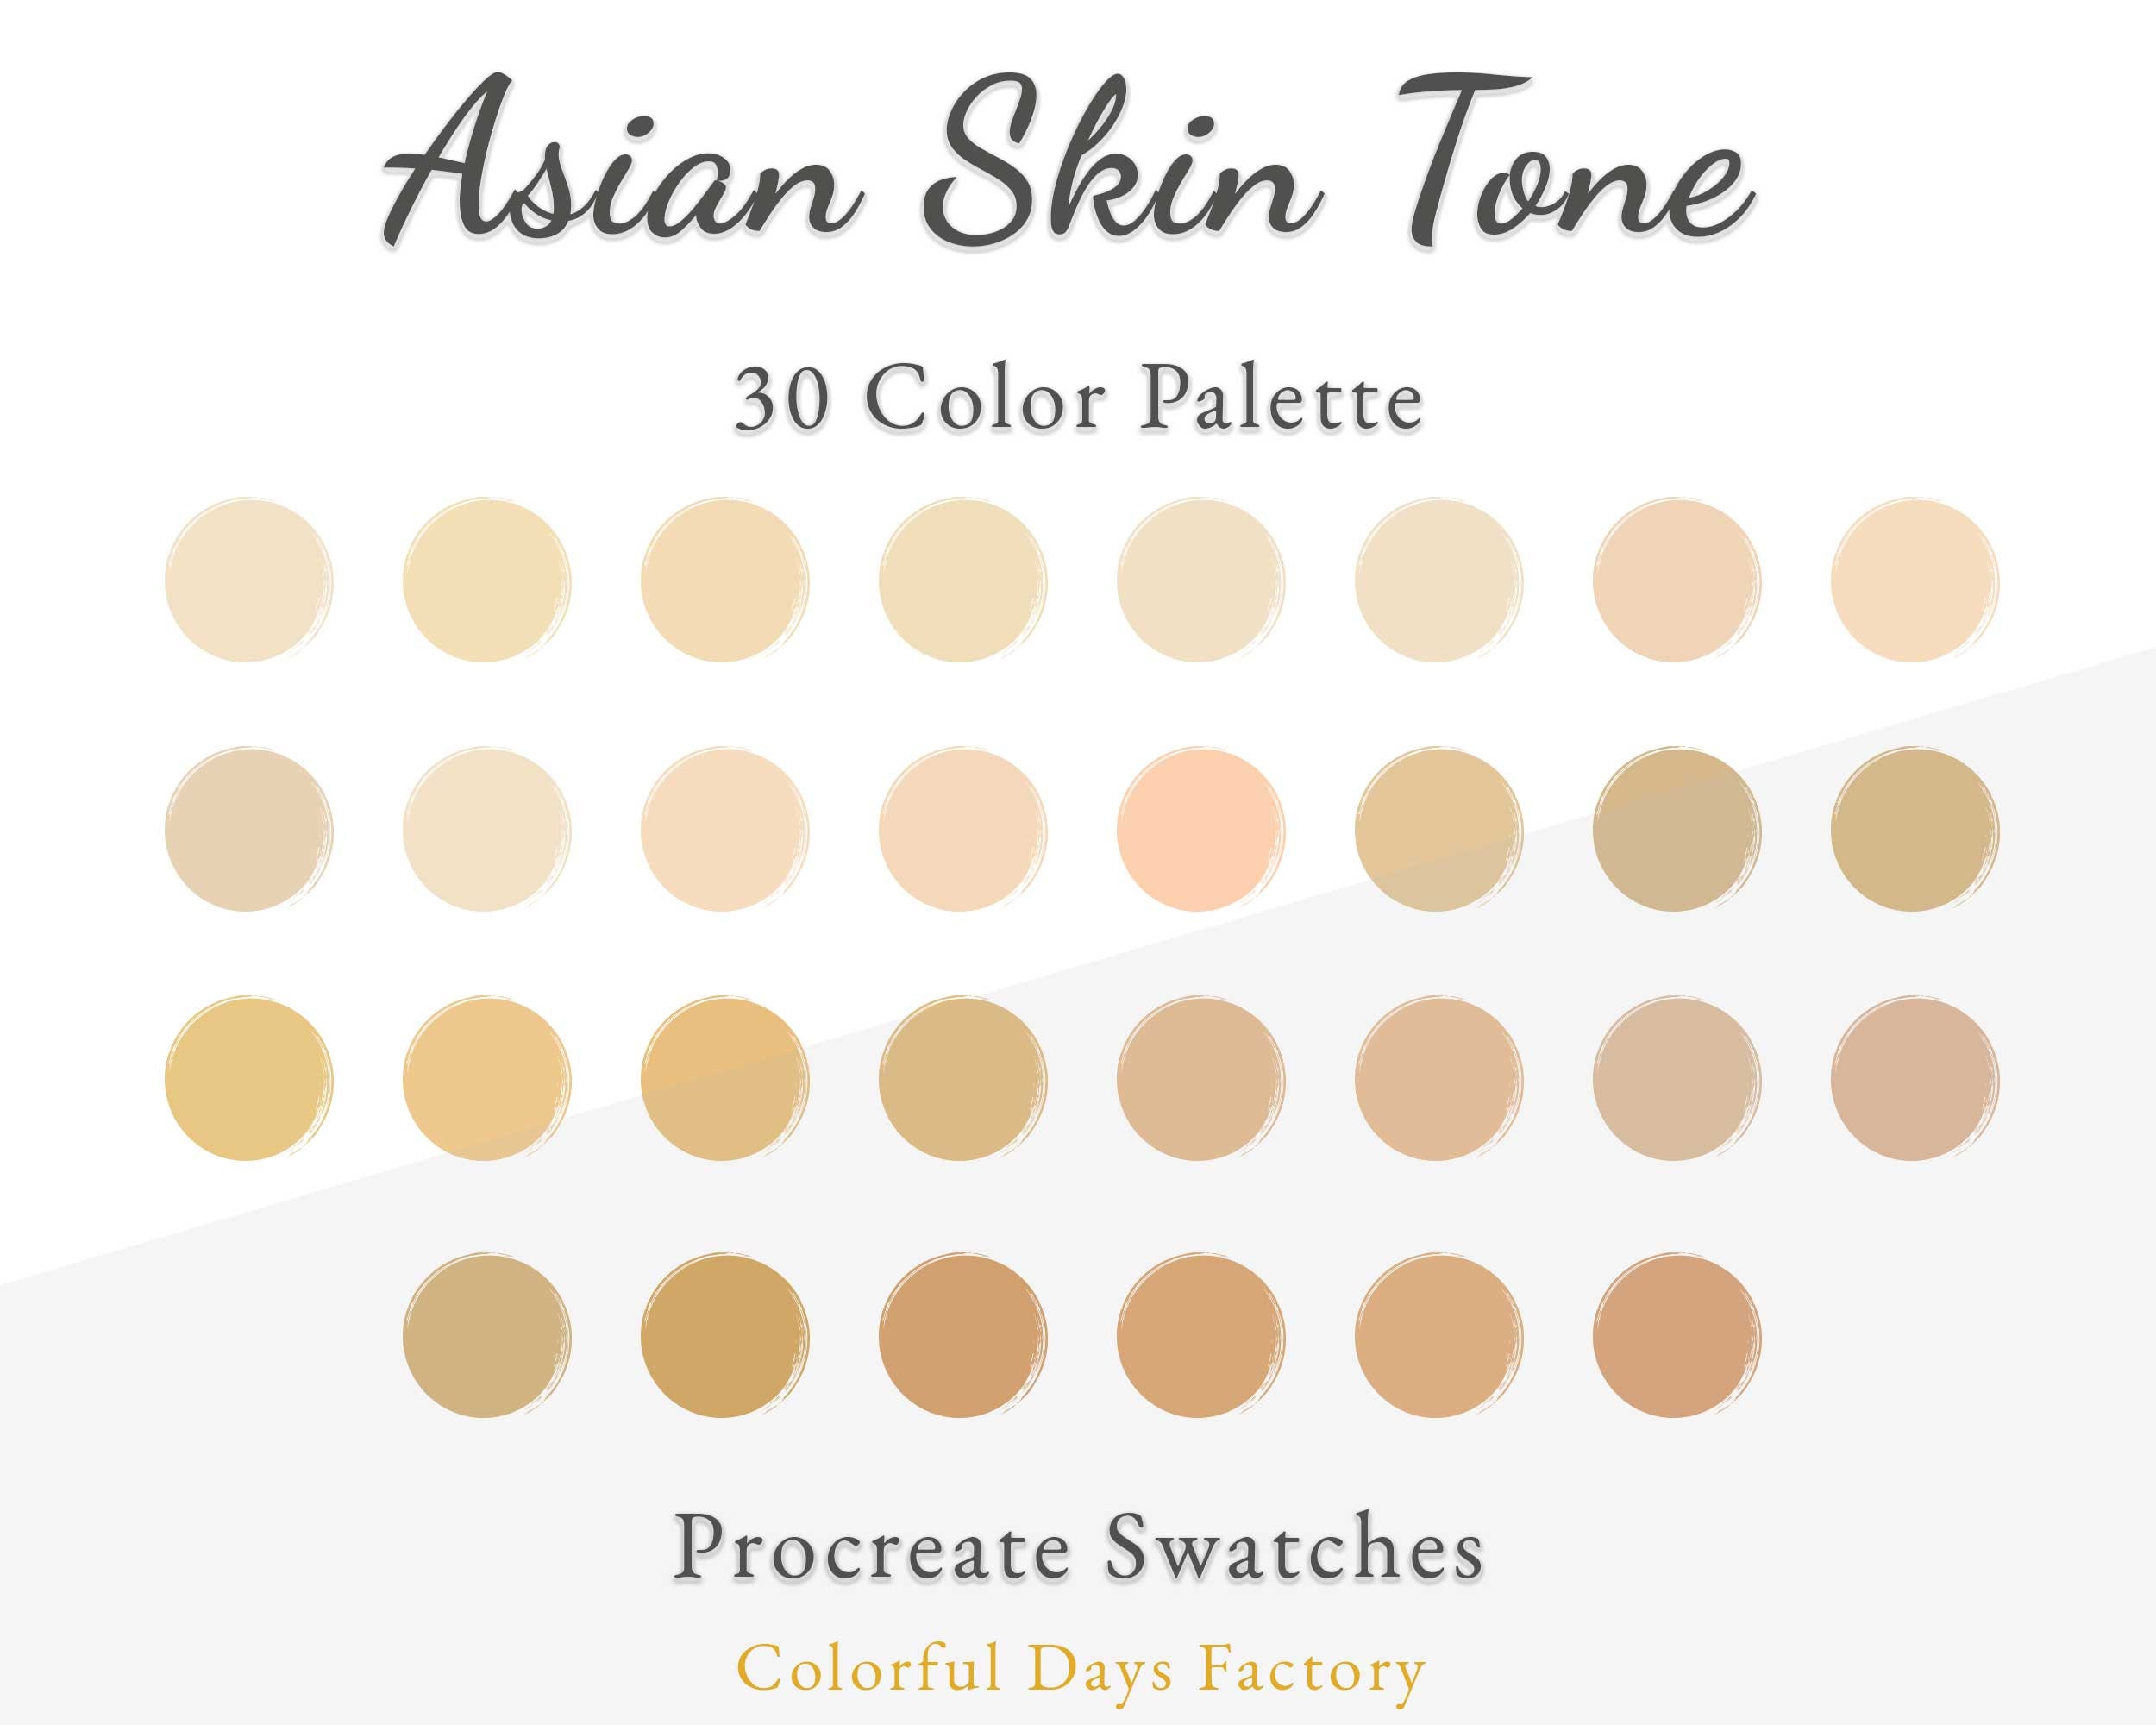 Complementary Nail Colors for Asian Skin Tones - wide 8